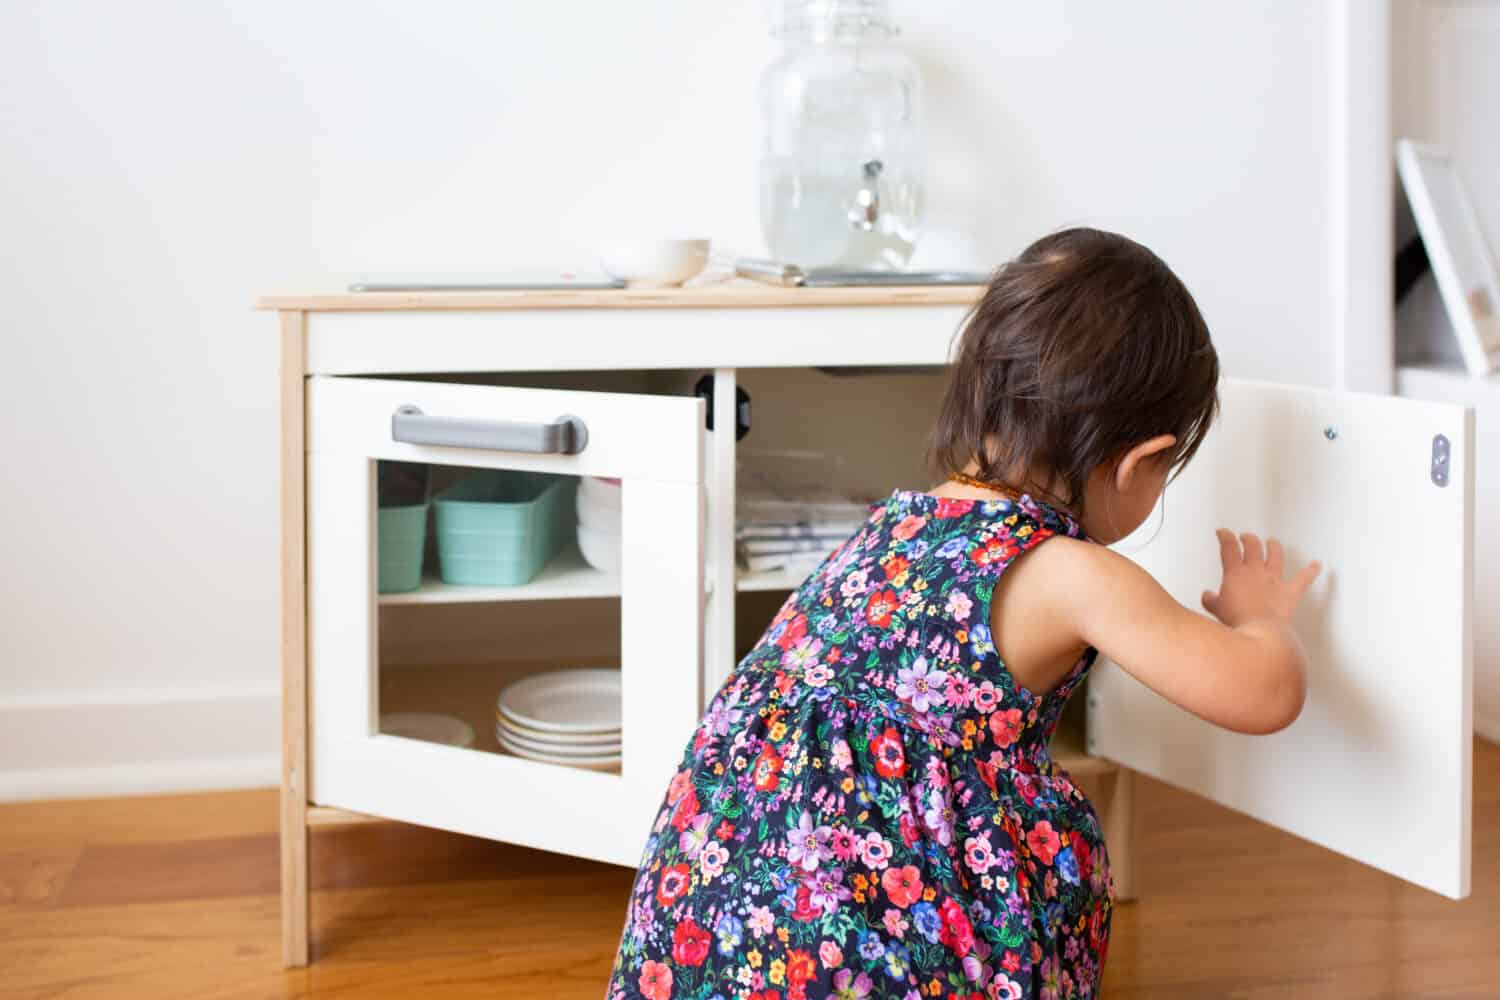 Toddler Girl with Play Kitchen